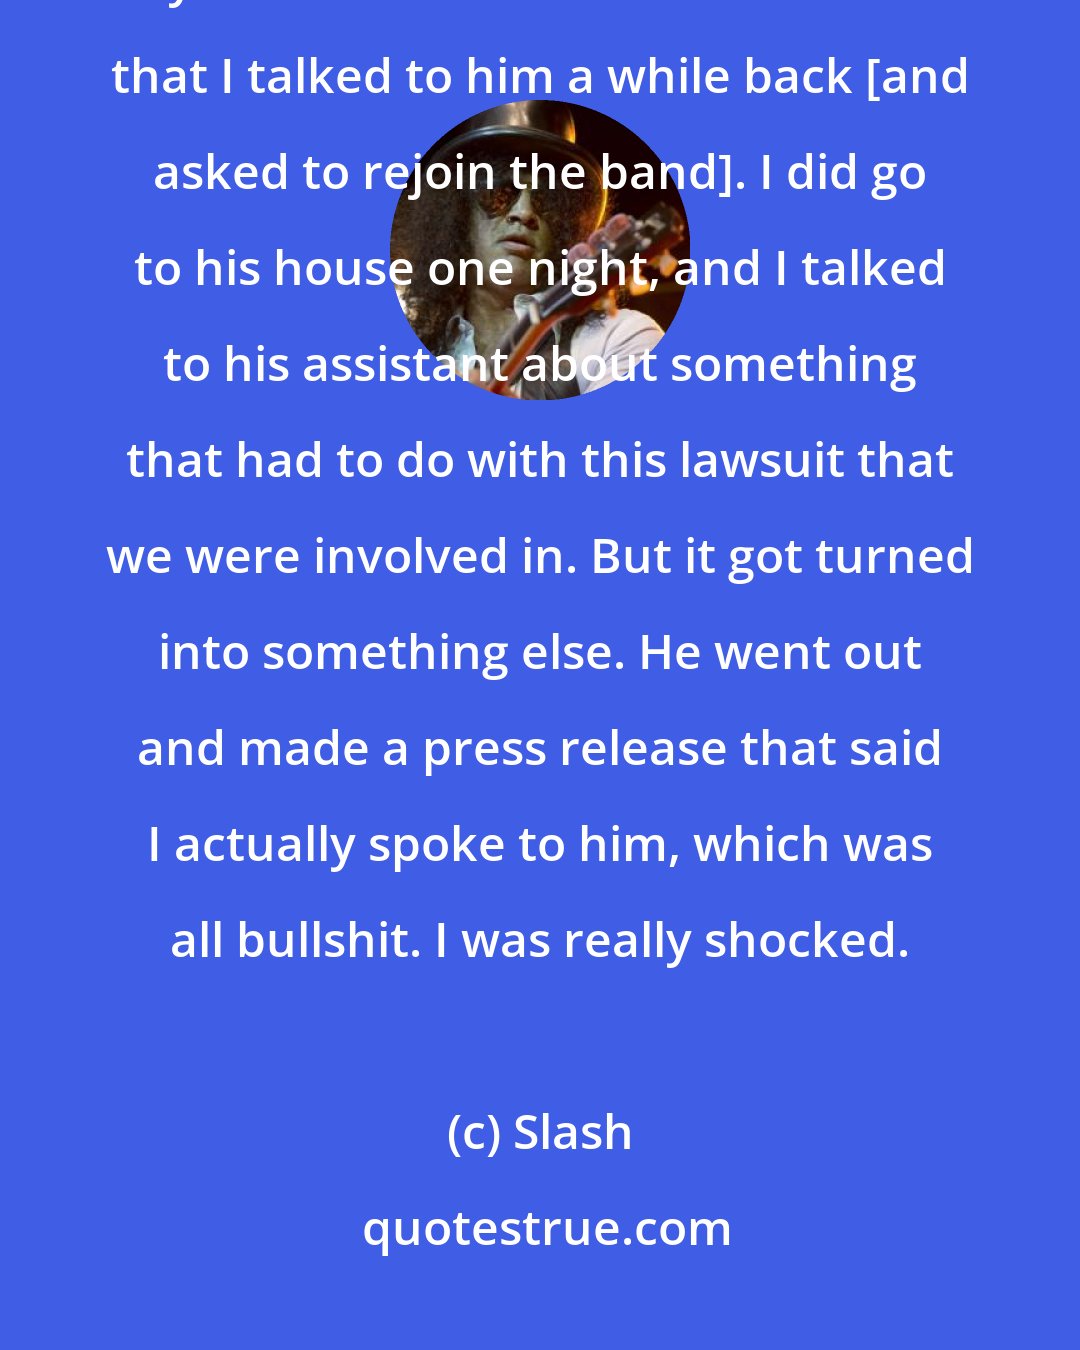 Slash: The last time I talked to Axl was in 1996. That was the last time we exchanged any sort of words. There was a rumor that I talked to him a while back [and asked to rejoin the band]. I did go to his house one night, and I talked to his assistant about something that had to do with this lawsuit that we were involved in. But it got turned into something else. He went out and made a press release that said I actually spoke to him, which was all bullshit. I was really shocked.